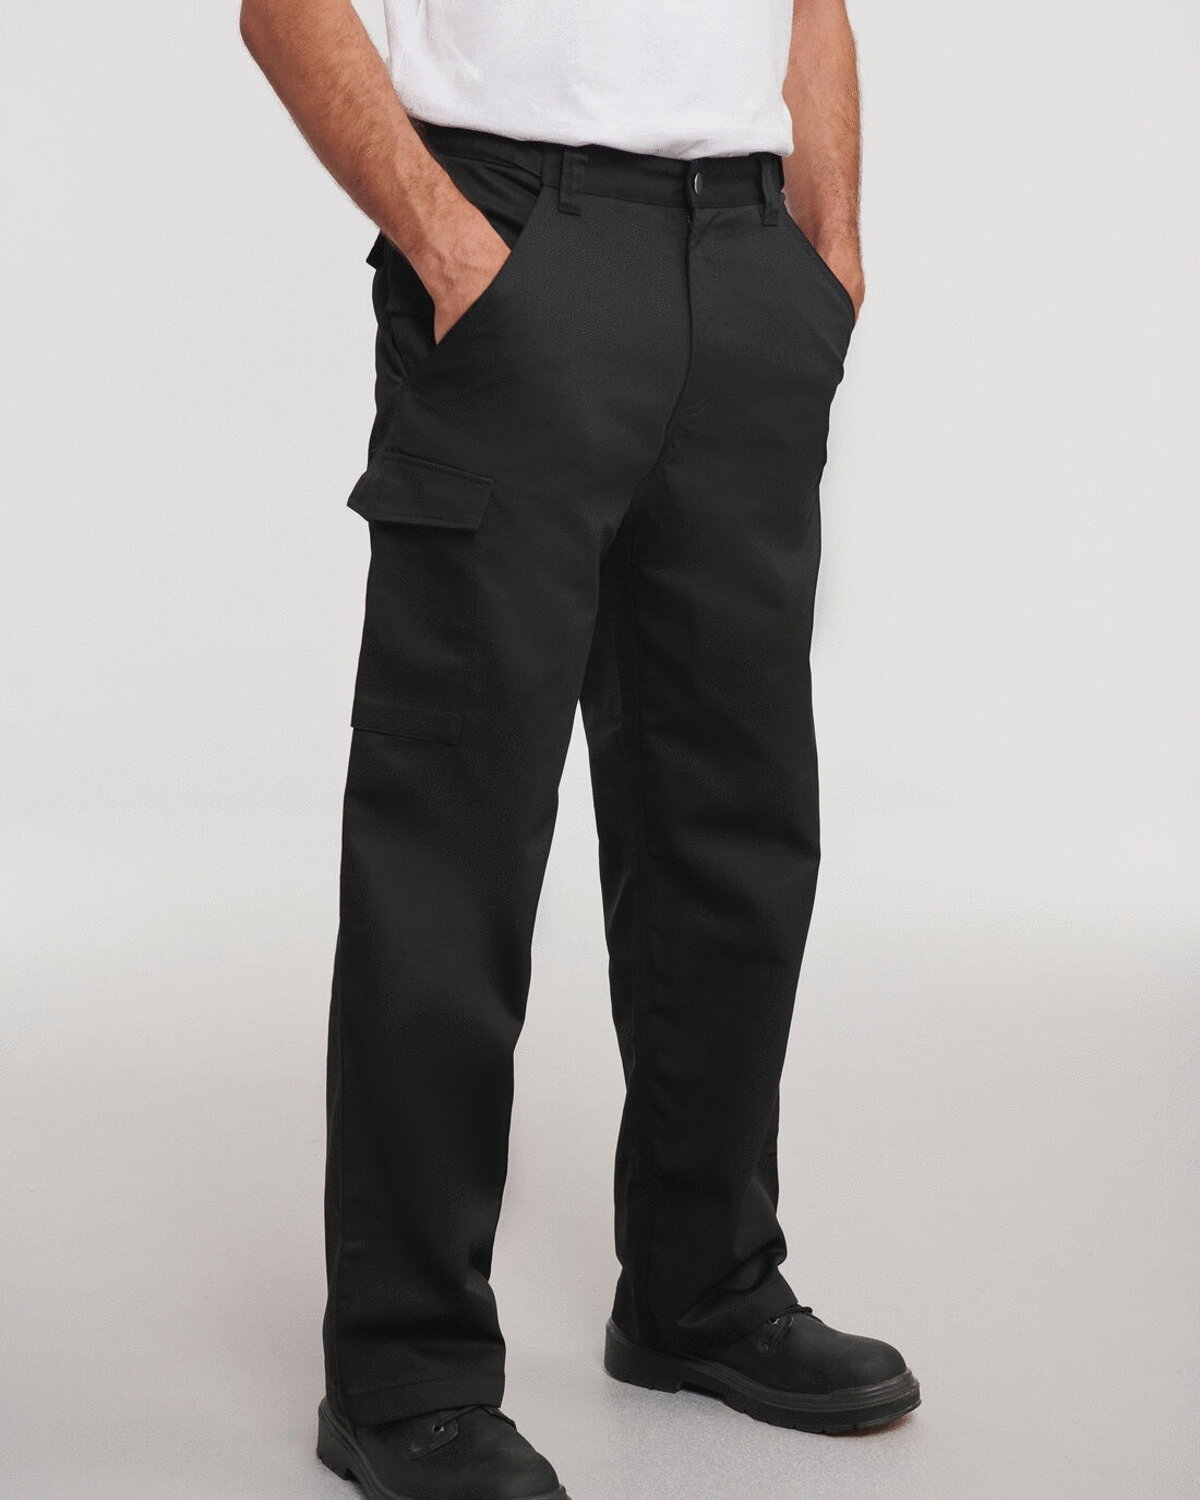 POLYCOTTON TWILL TROUSERS